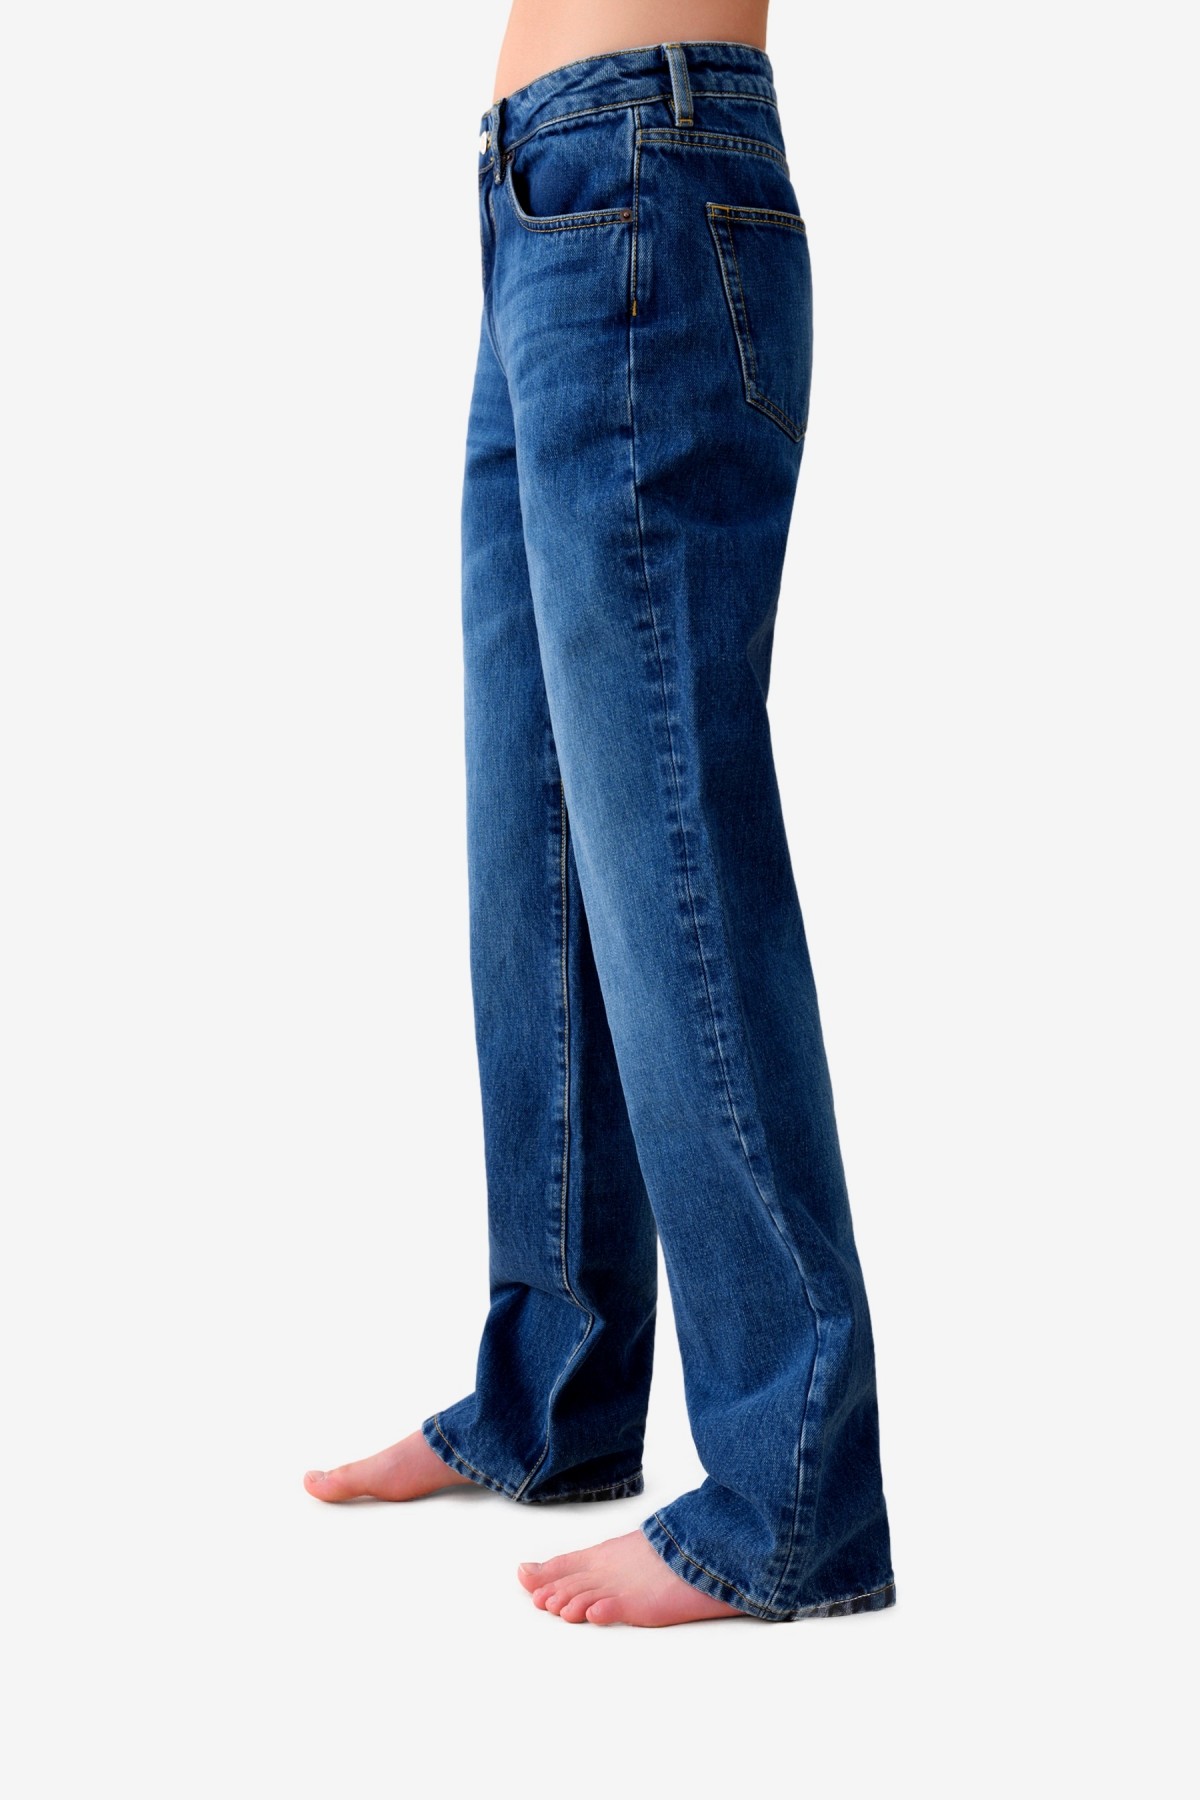 Jeanerica NW001 Niagara Jeans in Vintage 62 Low